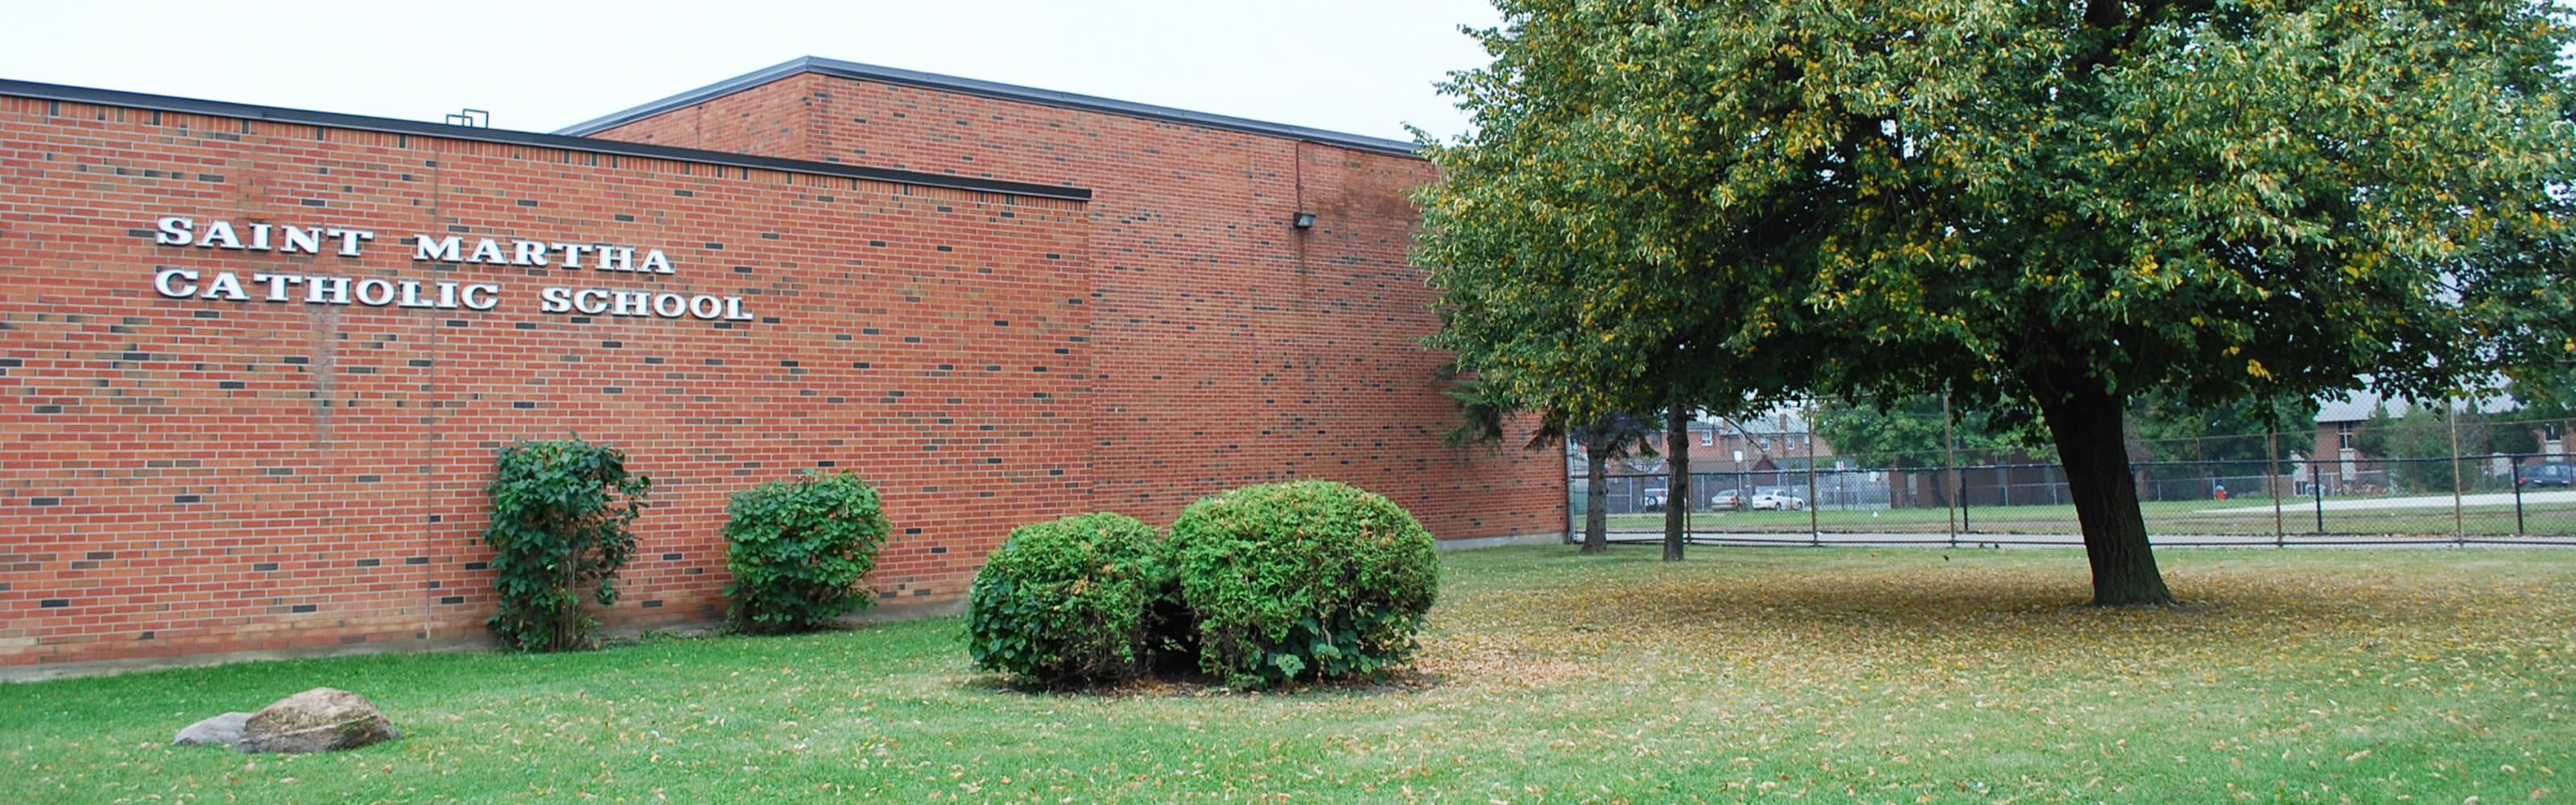 The front of the  St. Martha Catholic School building.